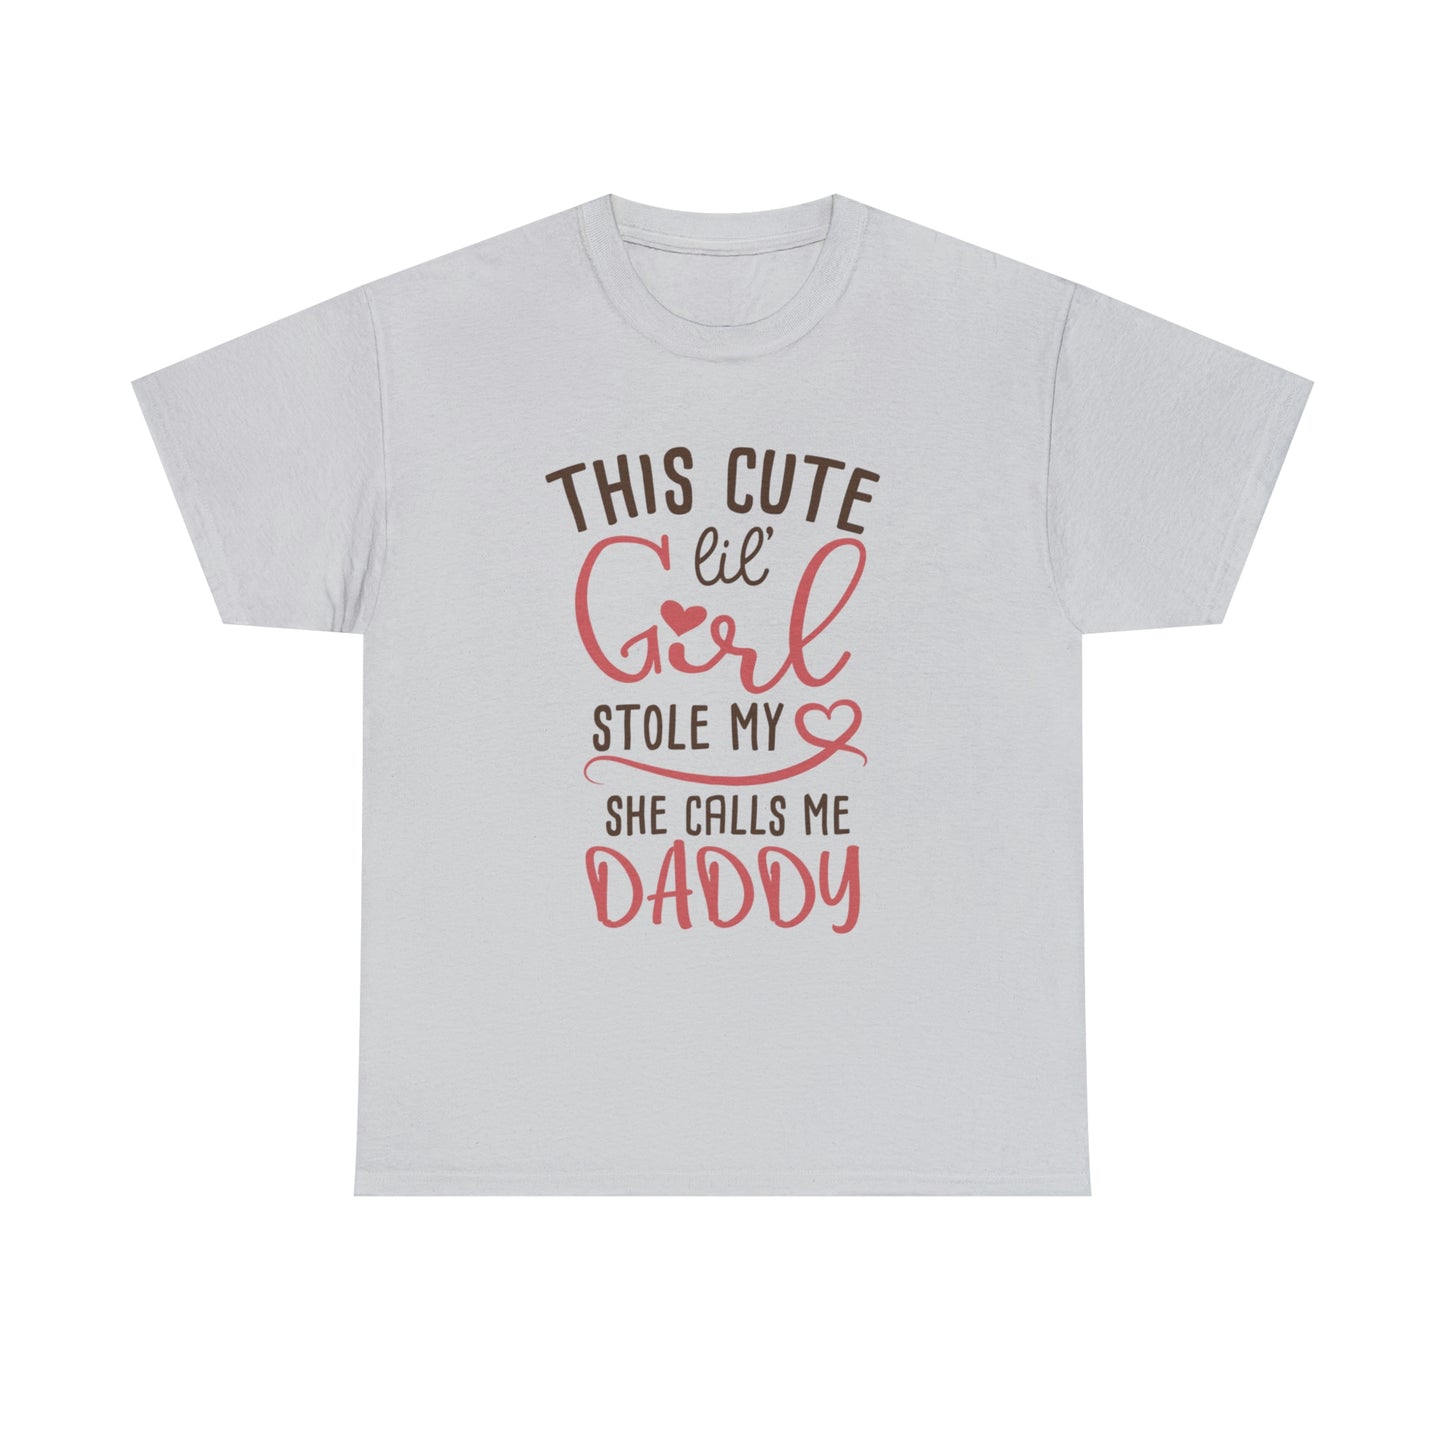 THIS CUTE LIL GIRL STOLE MY HEART T-SHIRT